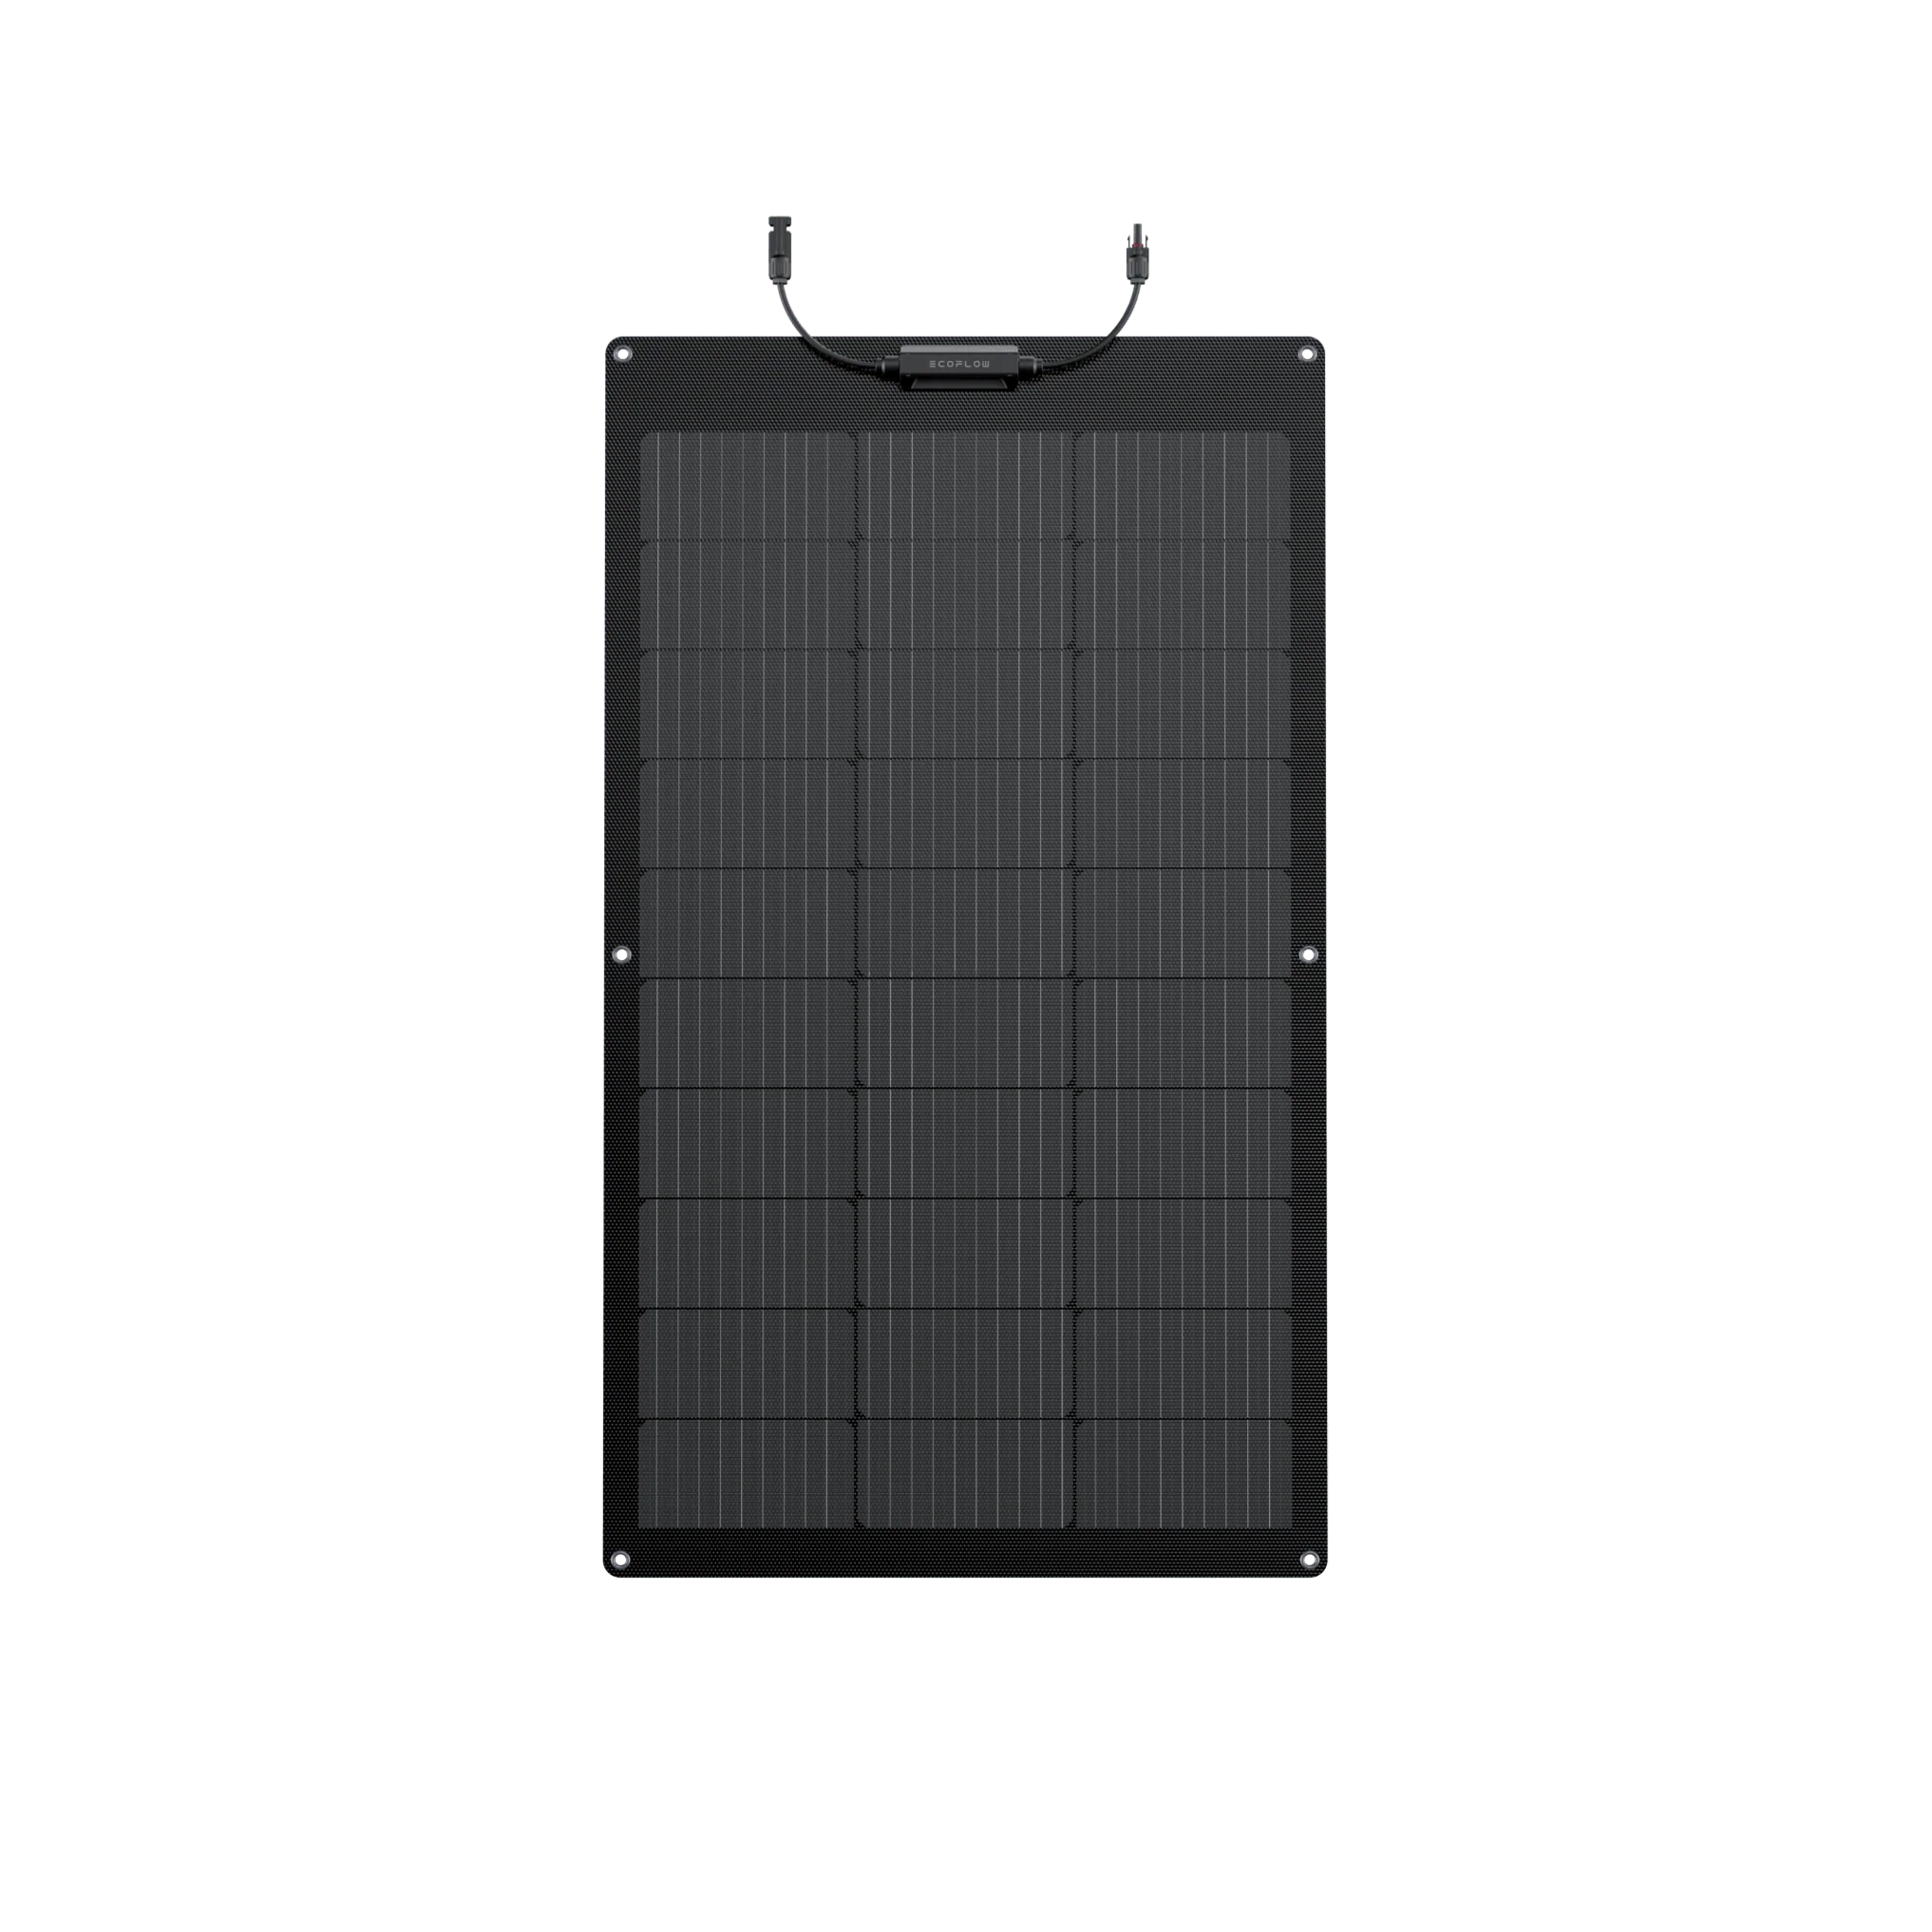 A black solar panel on a blue background available for shipment in 1-2 weeks.